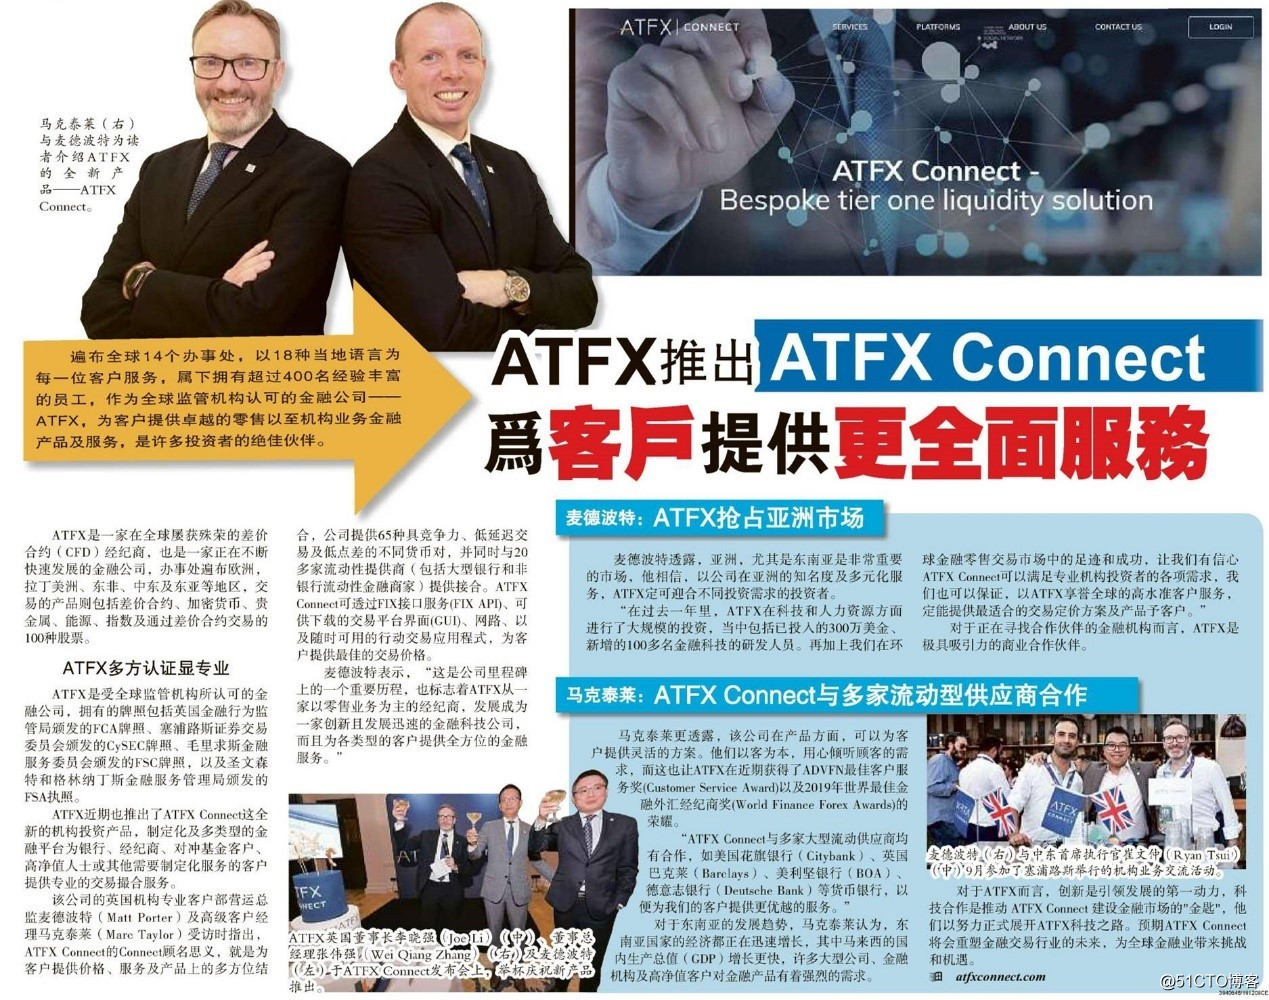 ATFX Connect Malaysia lines, outstanding performance shine